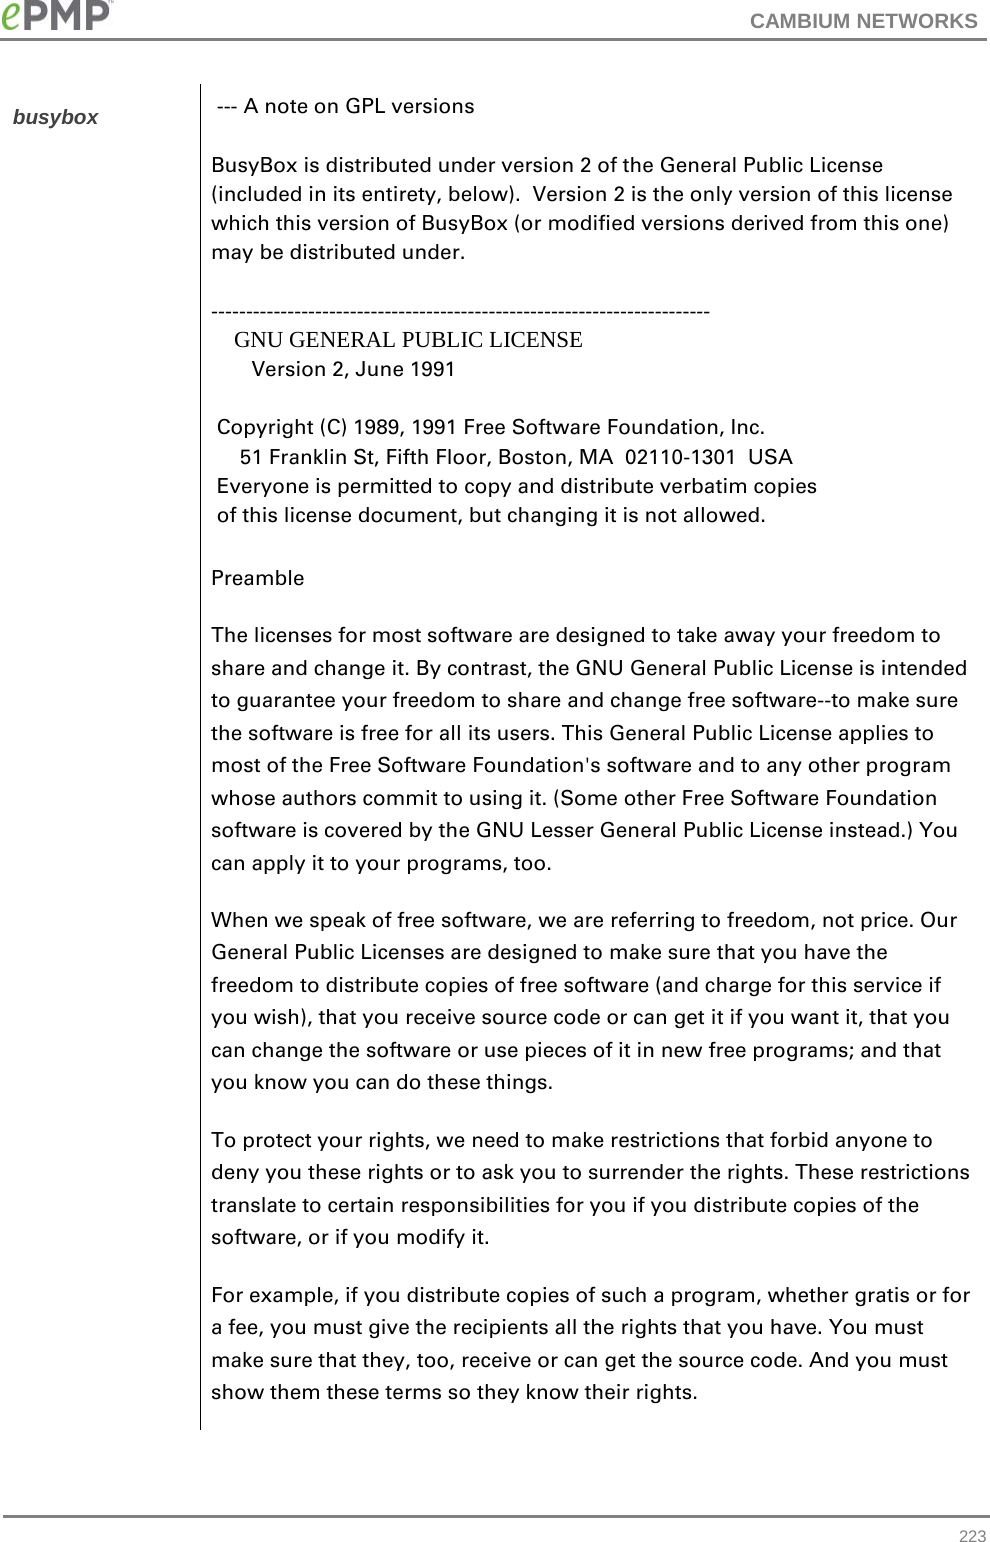 CAMBIUM NETWORKS  busybox  --- A note on GPL versions  BusyBox is distributed under version 2 of the General Public License (included in its entirety, below).  Version 2 is the only version of this license which this version of BusyBox (or modified versions derived from this one) may be distributed under.  ------------------------------------------------------------------------     GNU GENERAL PUBLIC LICENSE        Version 2, June 1991   Copyright (C) 1989, 1991 Free Software Foundation, Inc.      51 Franklin St, Fifth Floor, Boston, MA  02110-1301  USA  Everyone is permitted to copy and distribute verbatim copies  of this license document, but changing it is not allowed. Preamble The licenses for most software are designed to take away your freedom to share and change it. By contrast, the GNU General Public License is intended to guarantee your freedom to share and change free software--to make sure the software is free for all its users. This General Public License applies to most of the Free Software Foundation&apos;s software and to any other program whose authors commit to using it. (Some other Free Software Foundation software is covered by the GNU Lesser General Public License instead.) You can apply it to your programs, too. When we speak of free software, we are referring to freedom, not price. Our General Public Licenses are designed to make sure that you have the freedom to distribute copies of free software (and charge for this service if you wish), that you receive source code or can get it if you want it, that you can change the software or use pieces of it in new free programs; and that you know you can do these things. To protect your rights, we need to make restrictions that forbid anyone to deny you these rights or to ask you to surrender the rights. These restrictions translate to certain responsibilities for you if you distribute copies of the software, or if you modify it. For example, if you distribute copies of such a program, whether gratis or for a fee, you must give the recipients all the rights that you have. You must make sure that they, too, receive or can get the source code. And you must show them these terms so they know their rights.  223 